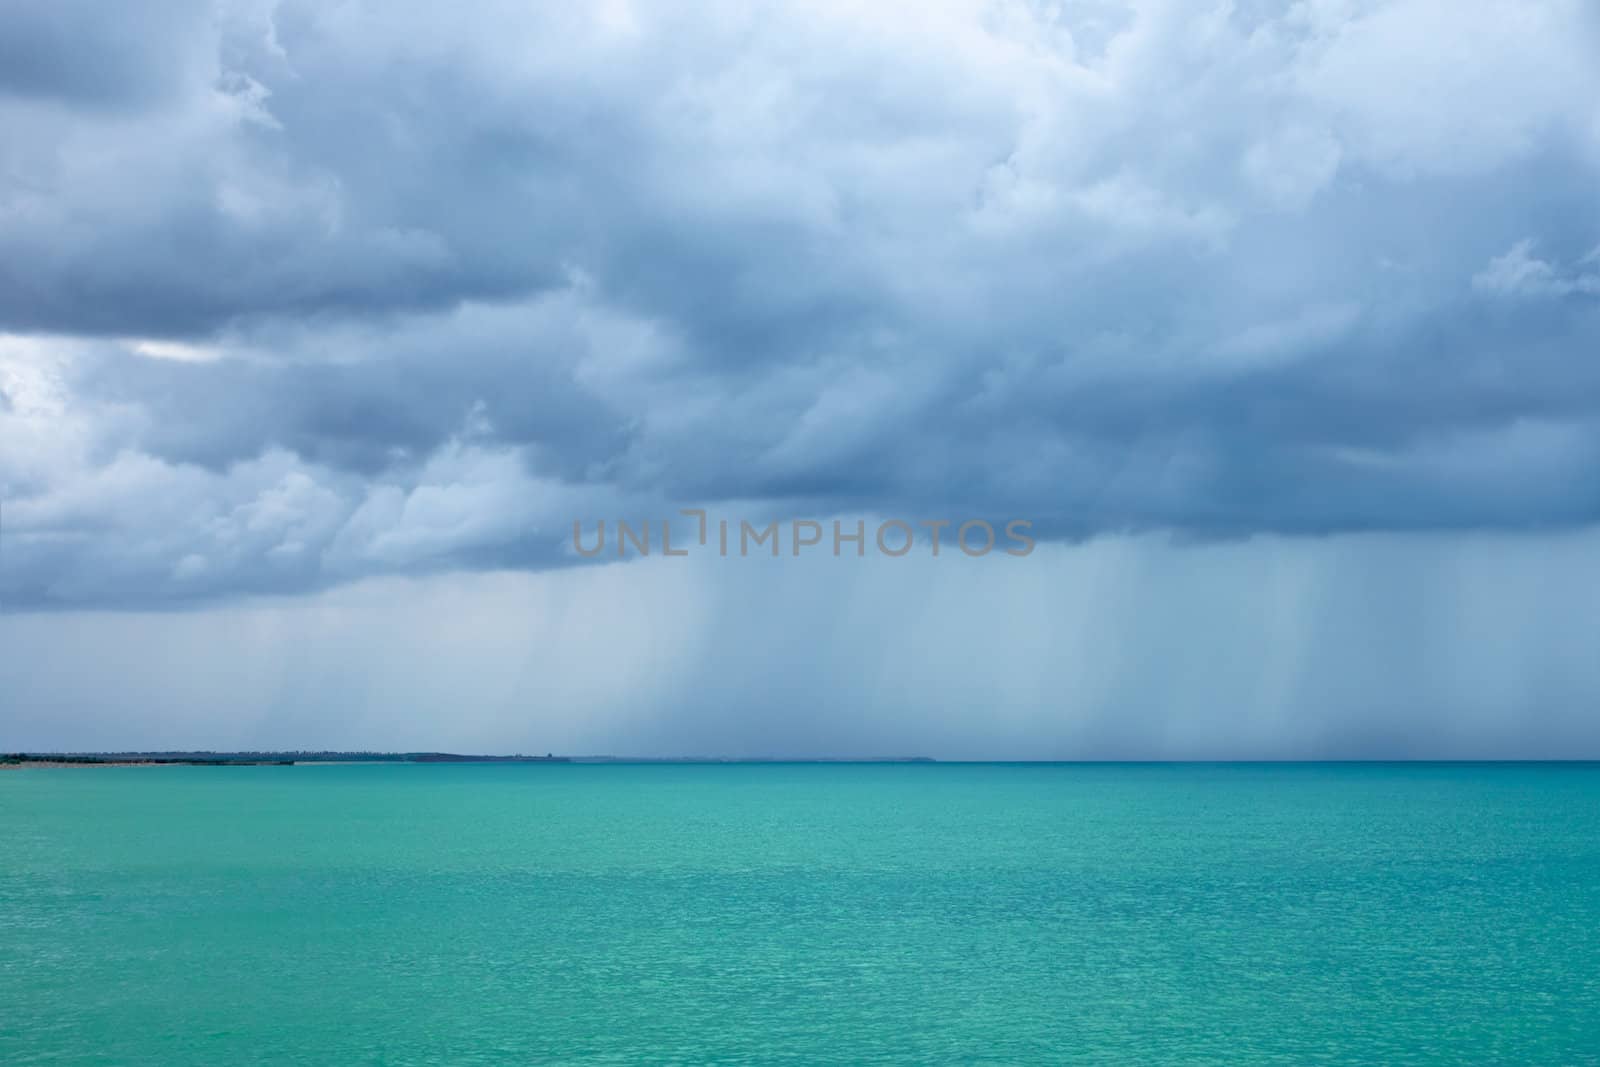 Cumulonimbus clouds over the turquoise sea by qiiip